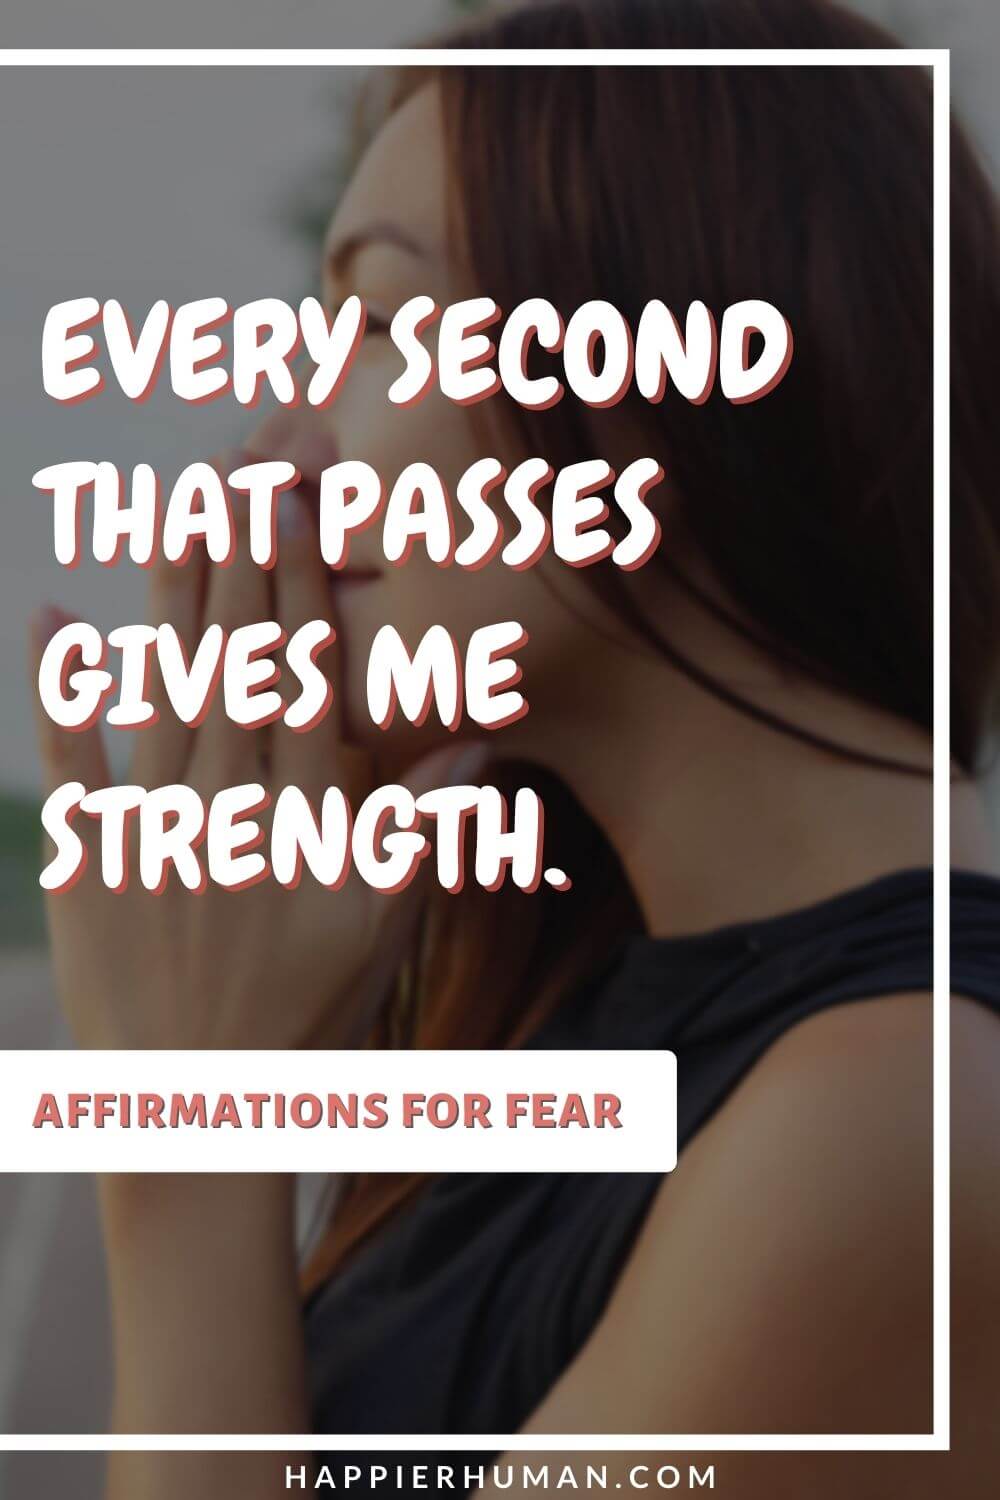 Affirmations for Fear - Every second that passes gives me strength. | affirmations for fear of failure | affirmations for fear of death | affirmations for fear of being alone